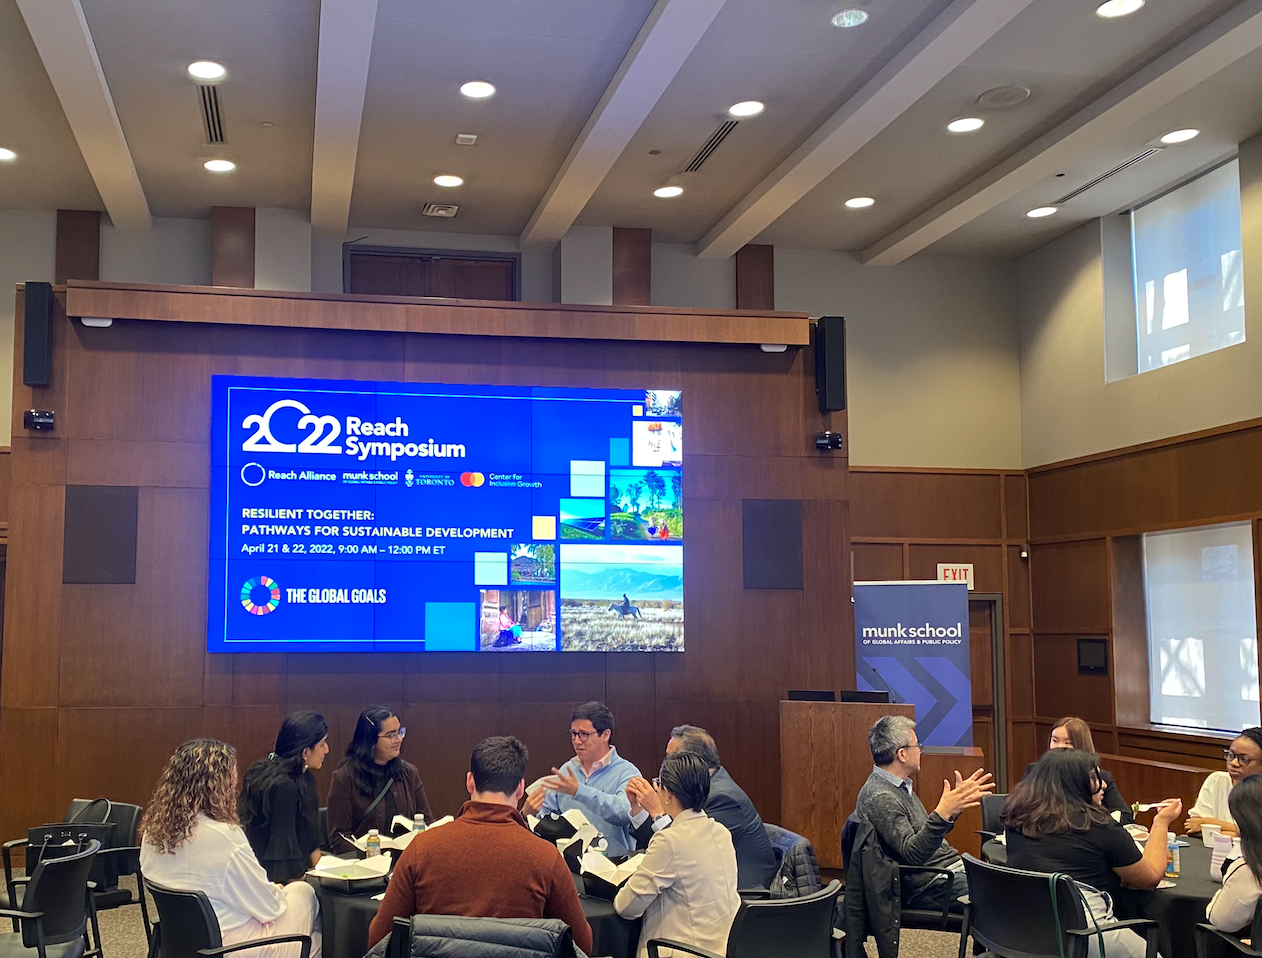 2022 Reach Symposium attendees in discussion at the University of Toronto’s Munk School. Source: Reach Alliance